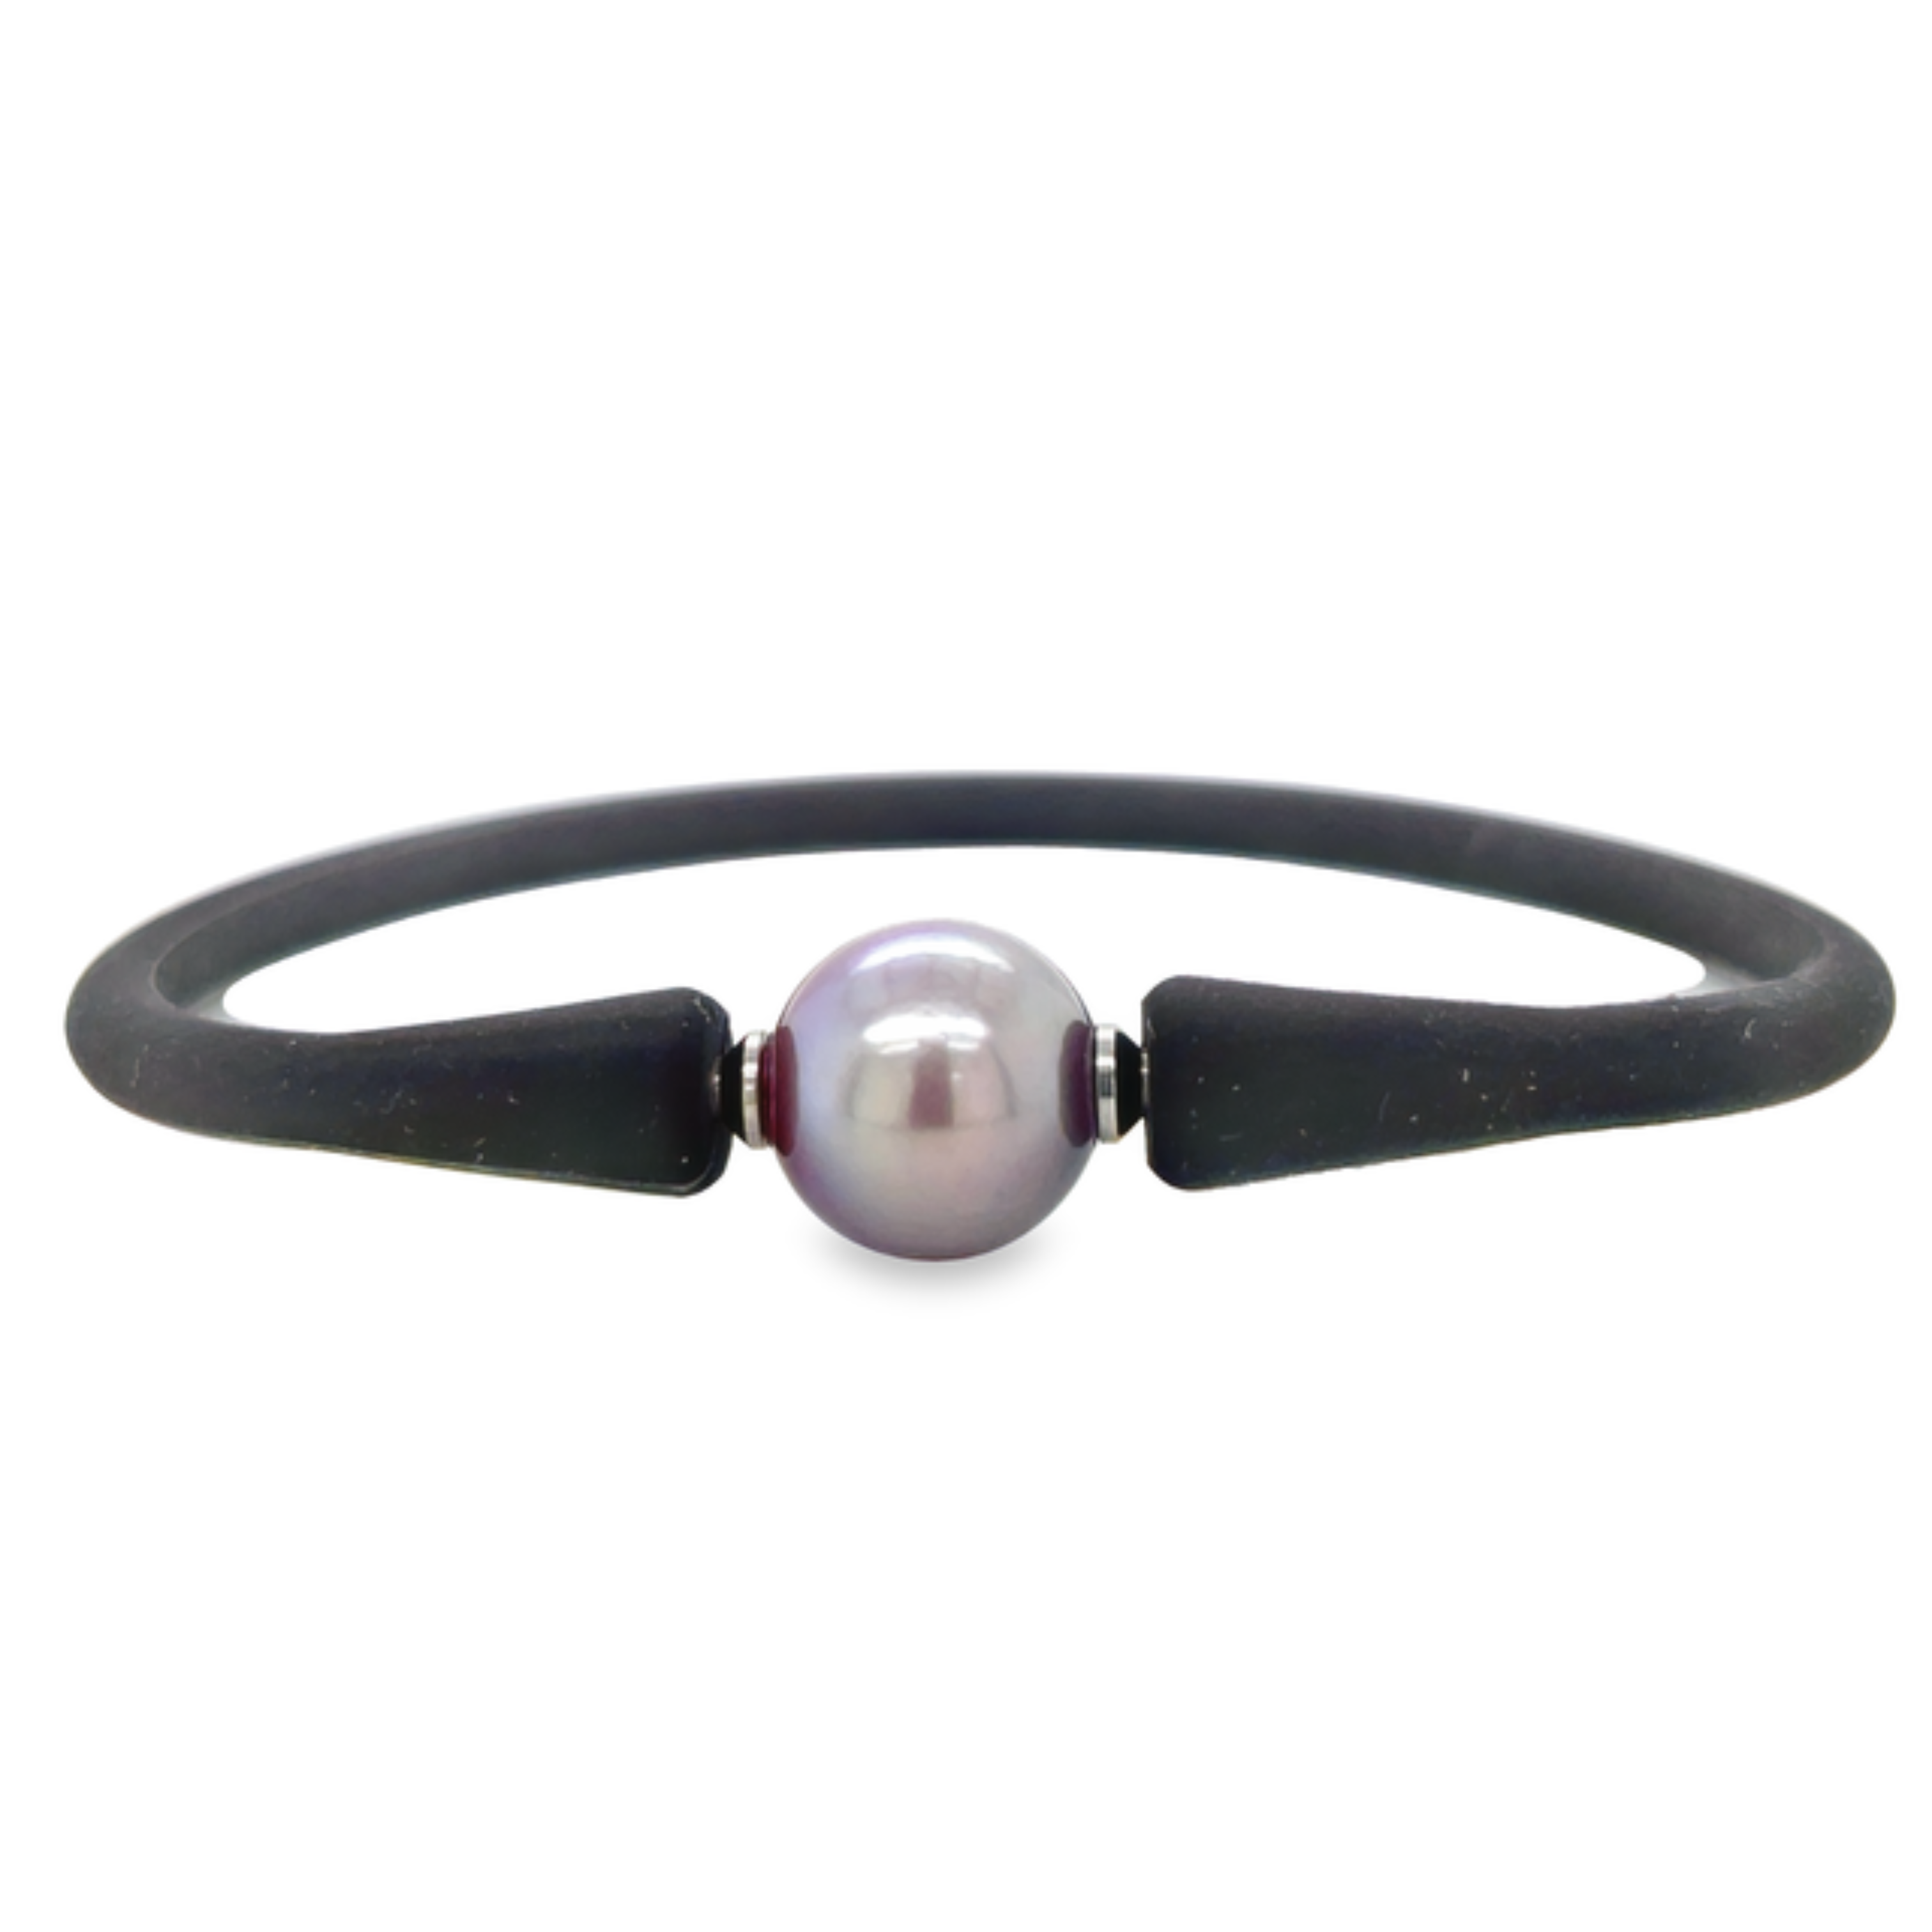 Edison pearls are freshwater pearl that are cultivated one pearl per mussel. This allows the mussel to direct all its attention at creating a single amazing pearl with South Sea pearl size.  Edison pearls are known for their intense, metallic luster & size.  11.30 mm  Purplish color  Black bracelet   Stretchable rubber bracelet   Stainless steel holders   Price per bracelet 